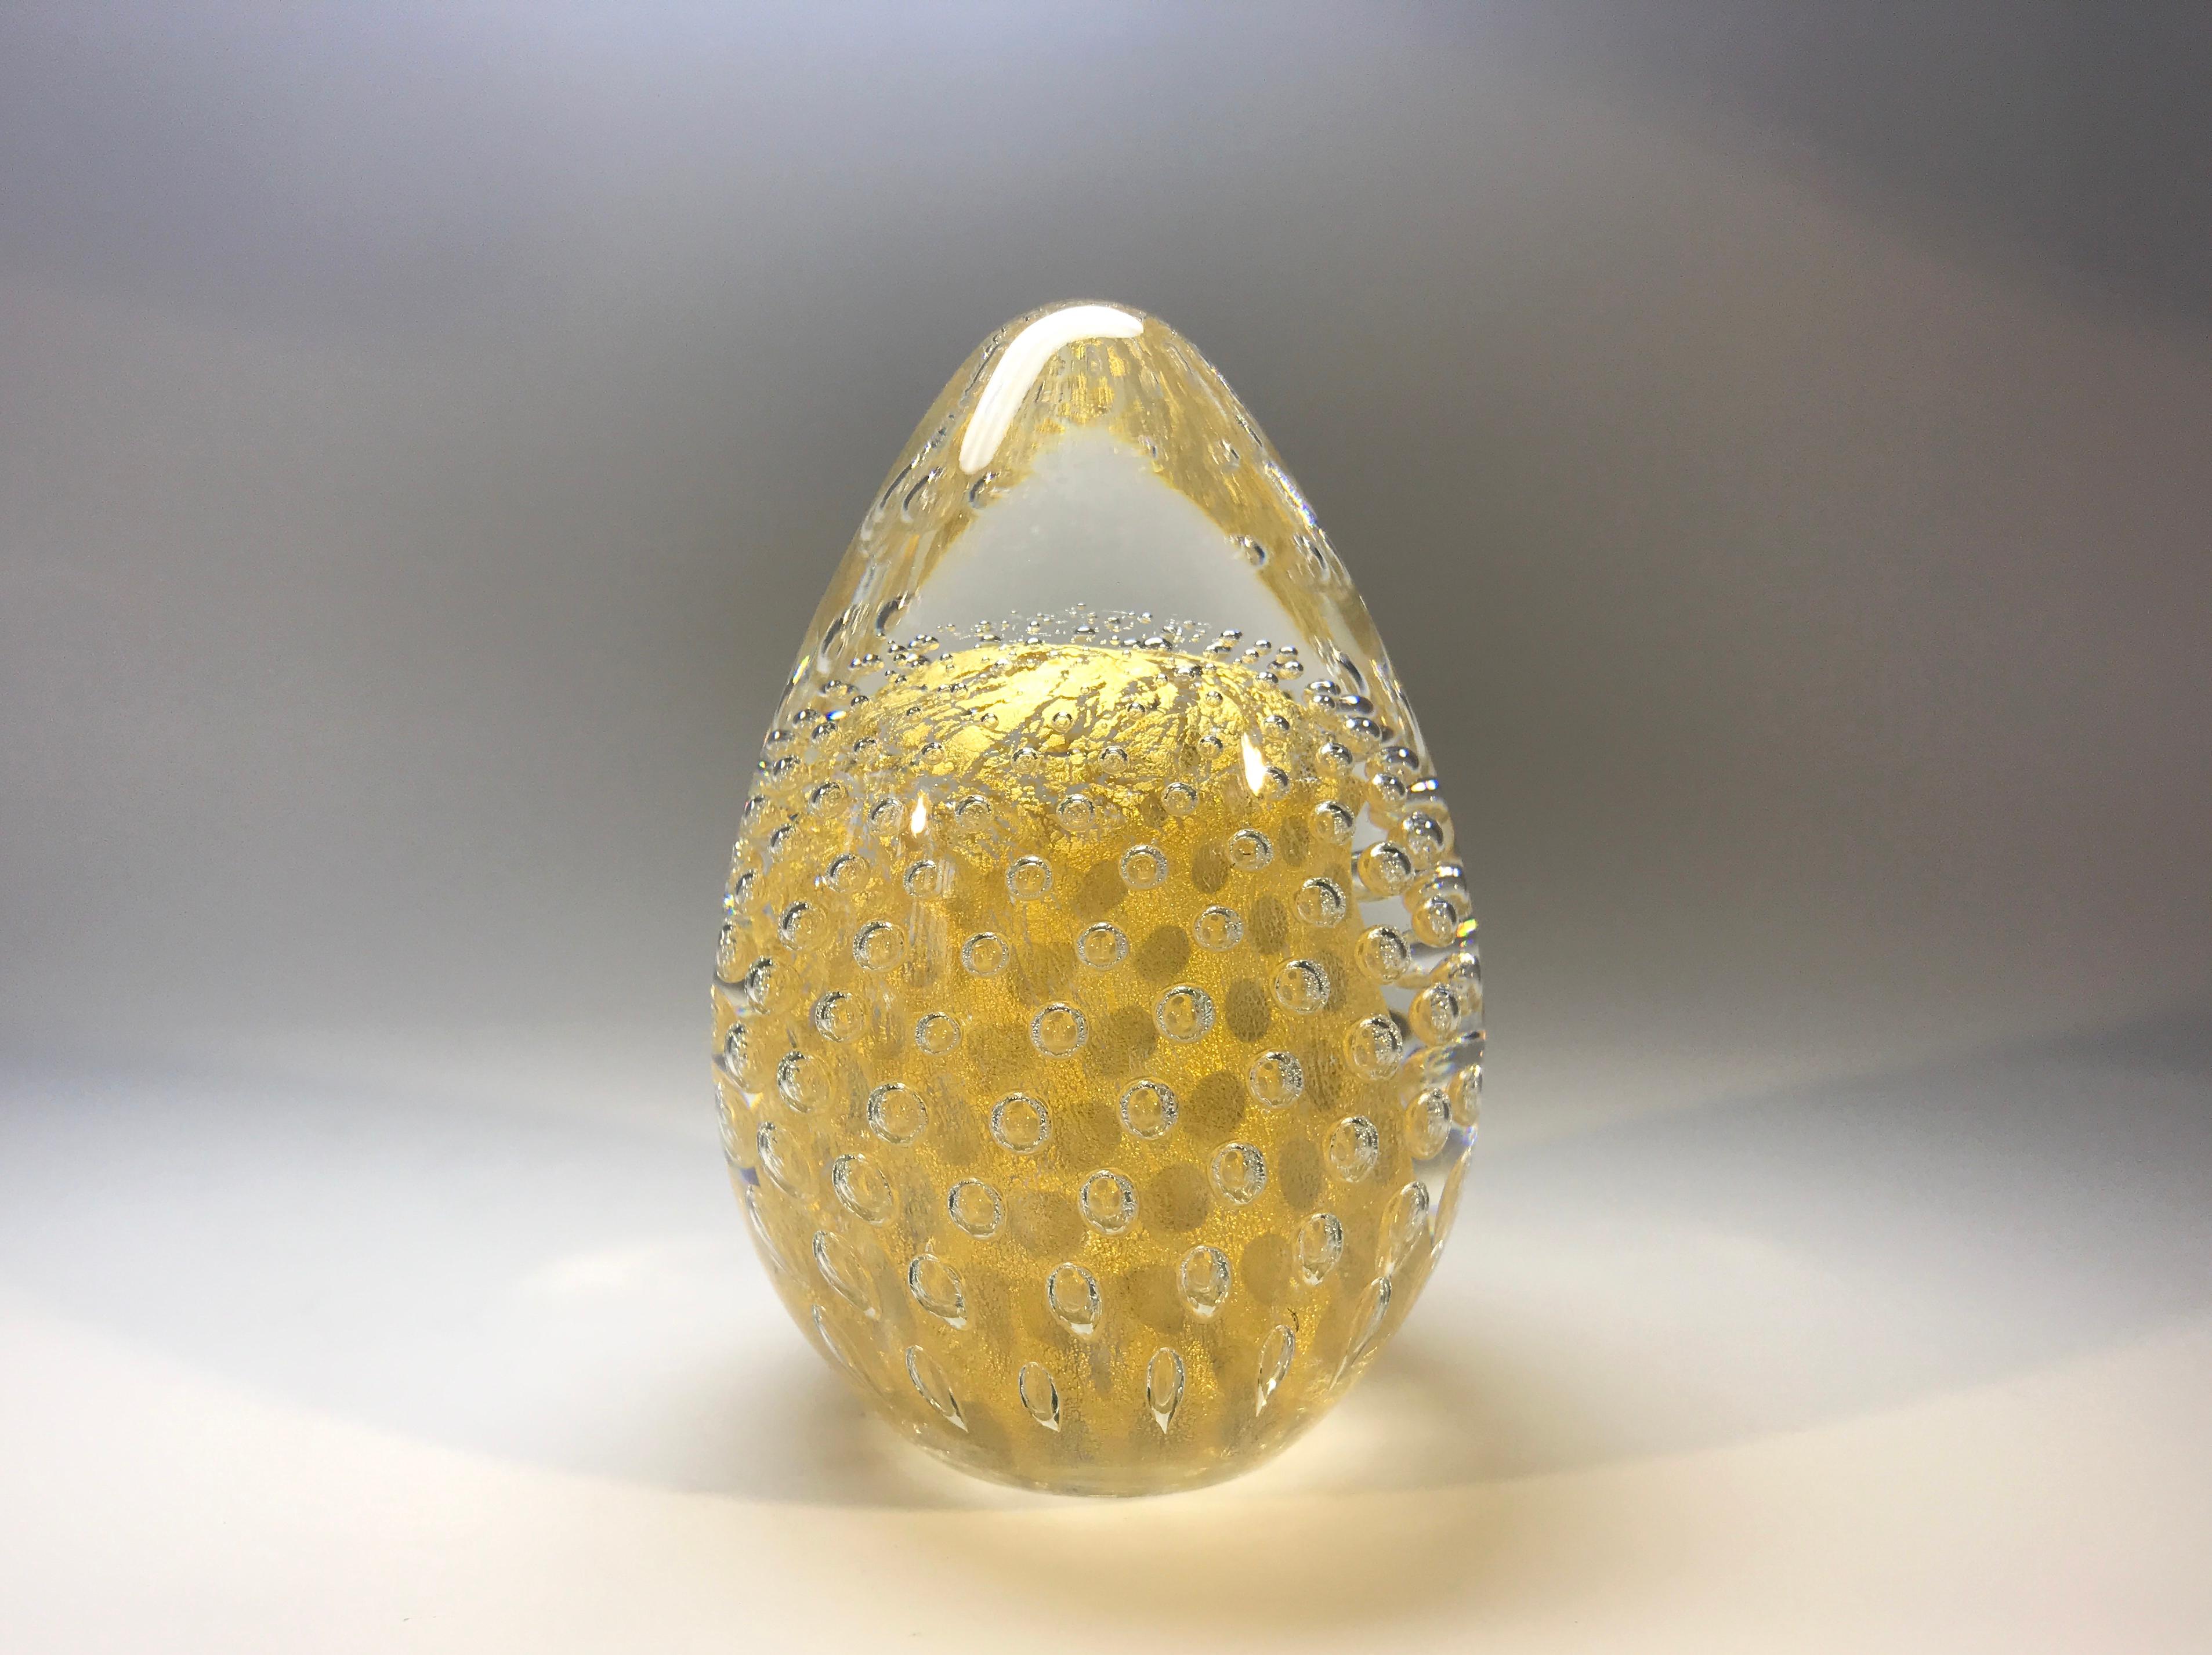 Exquisite Swedish crystal and 24-karat pure gold, hand blown egg paperweight from FM Konstglas, Ronneby, Sweden
Italian brothers Josef and Benito Marcolin founded FM Konstglass in Sweden after learning their craft on the island of Murano, Venice
A